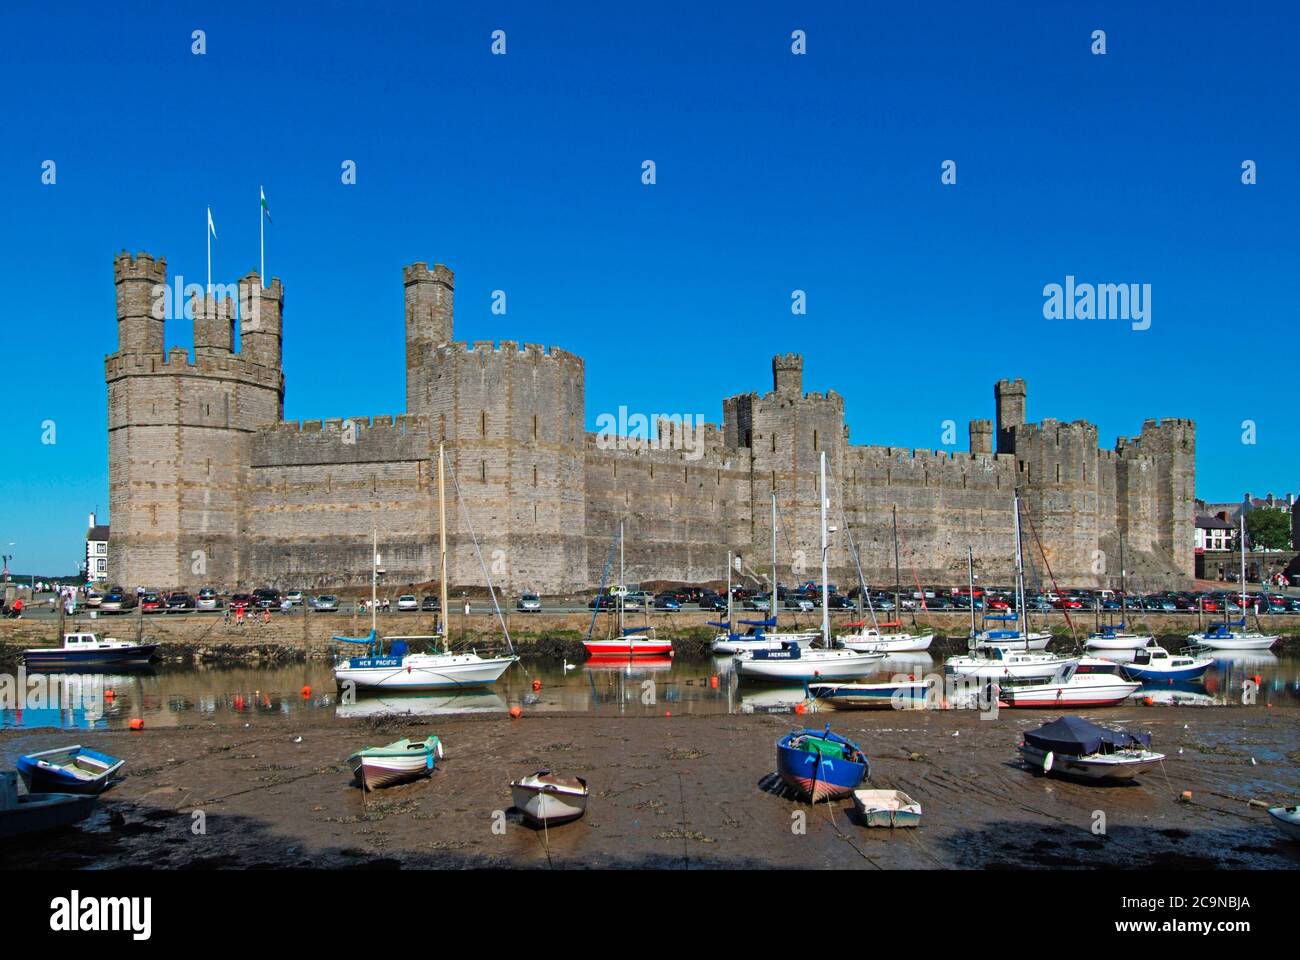 Caernarfon Castle Welsh medieval historical stone fortress building on River Seiont boats in landscape UNESCO heritage tourism Gwynedd North Wales UK Stock Photo